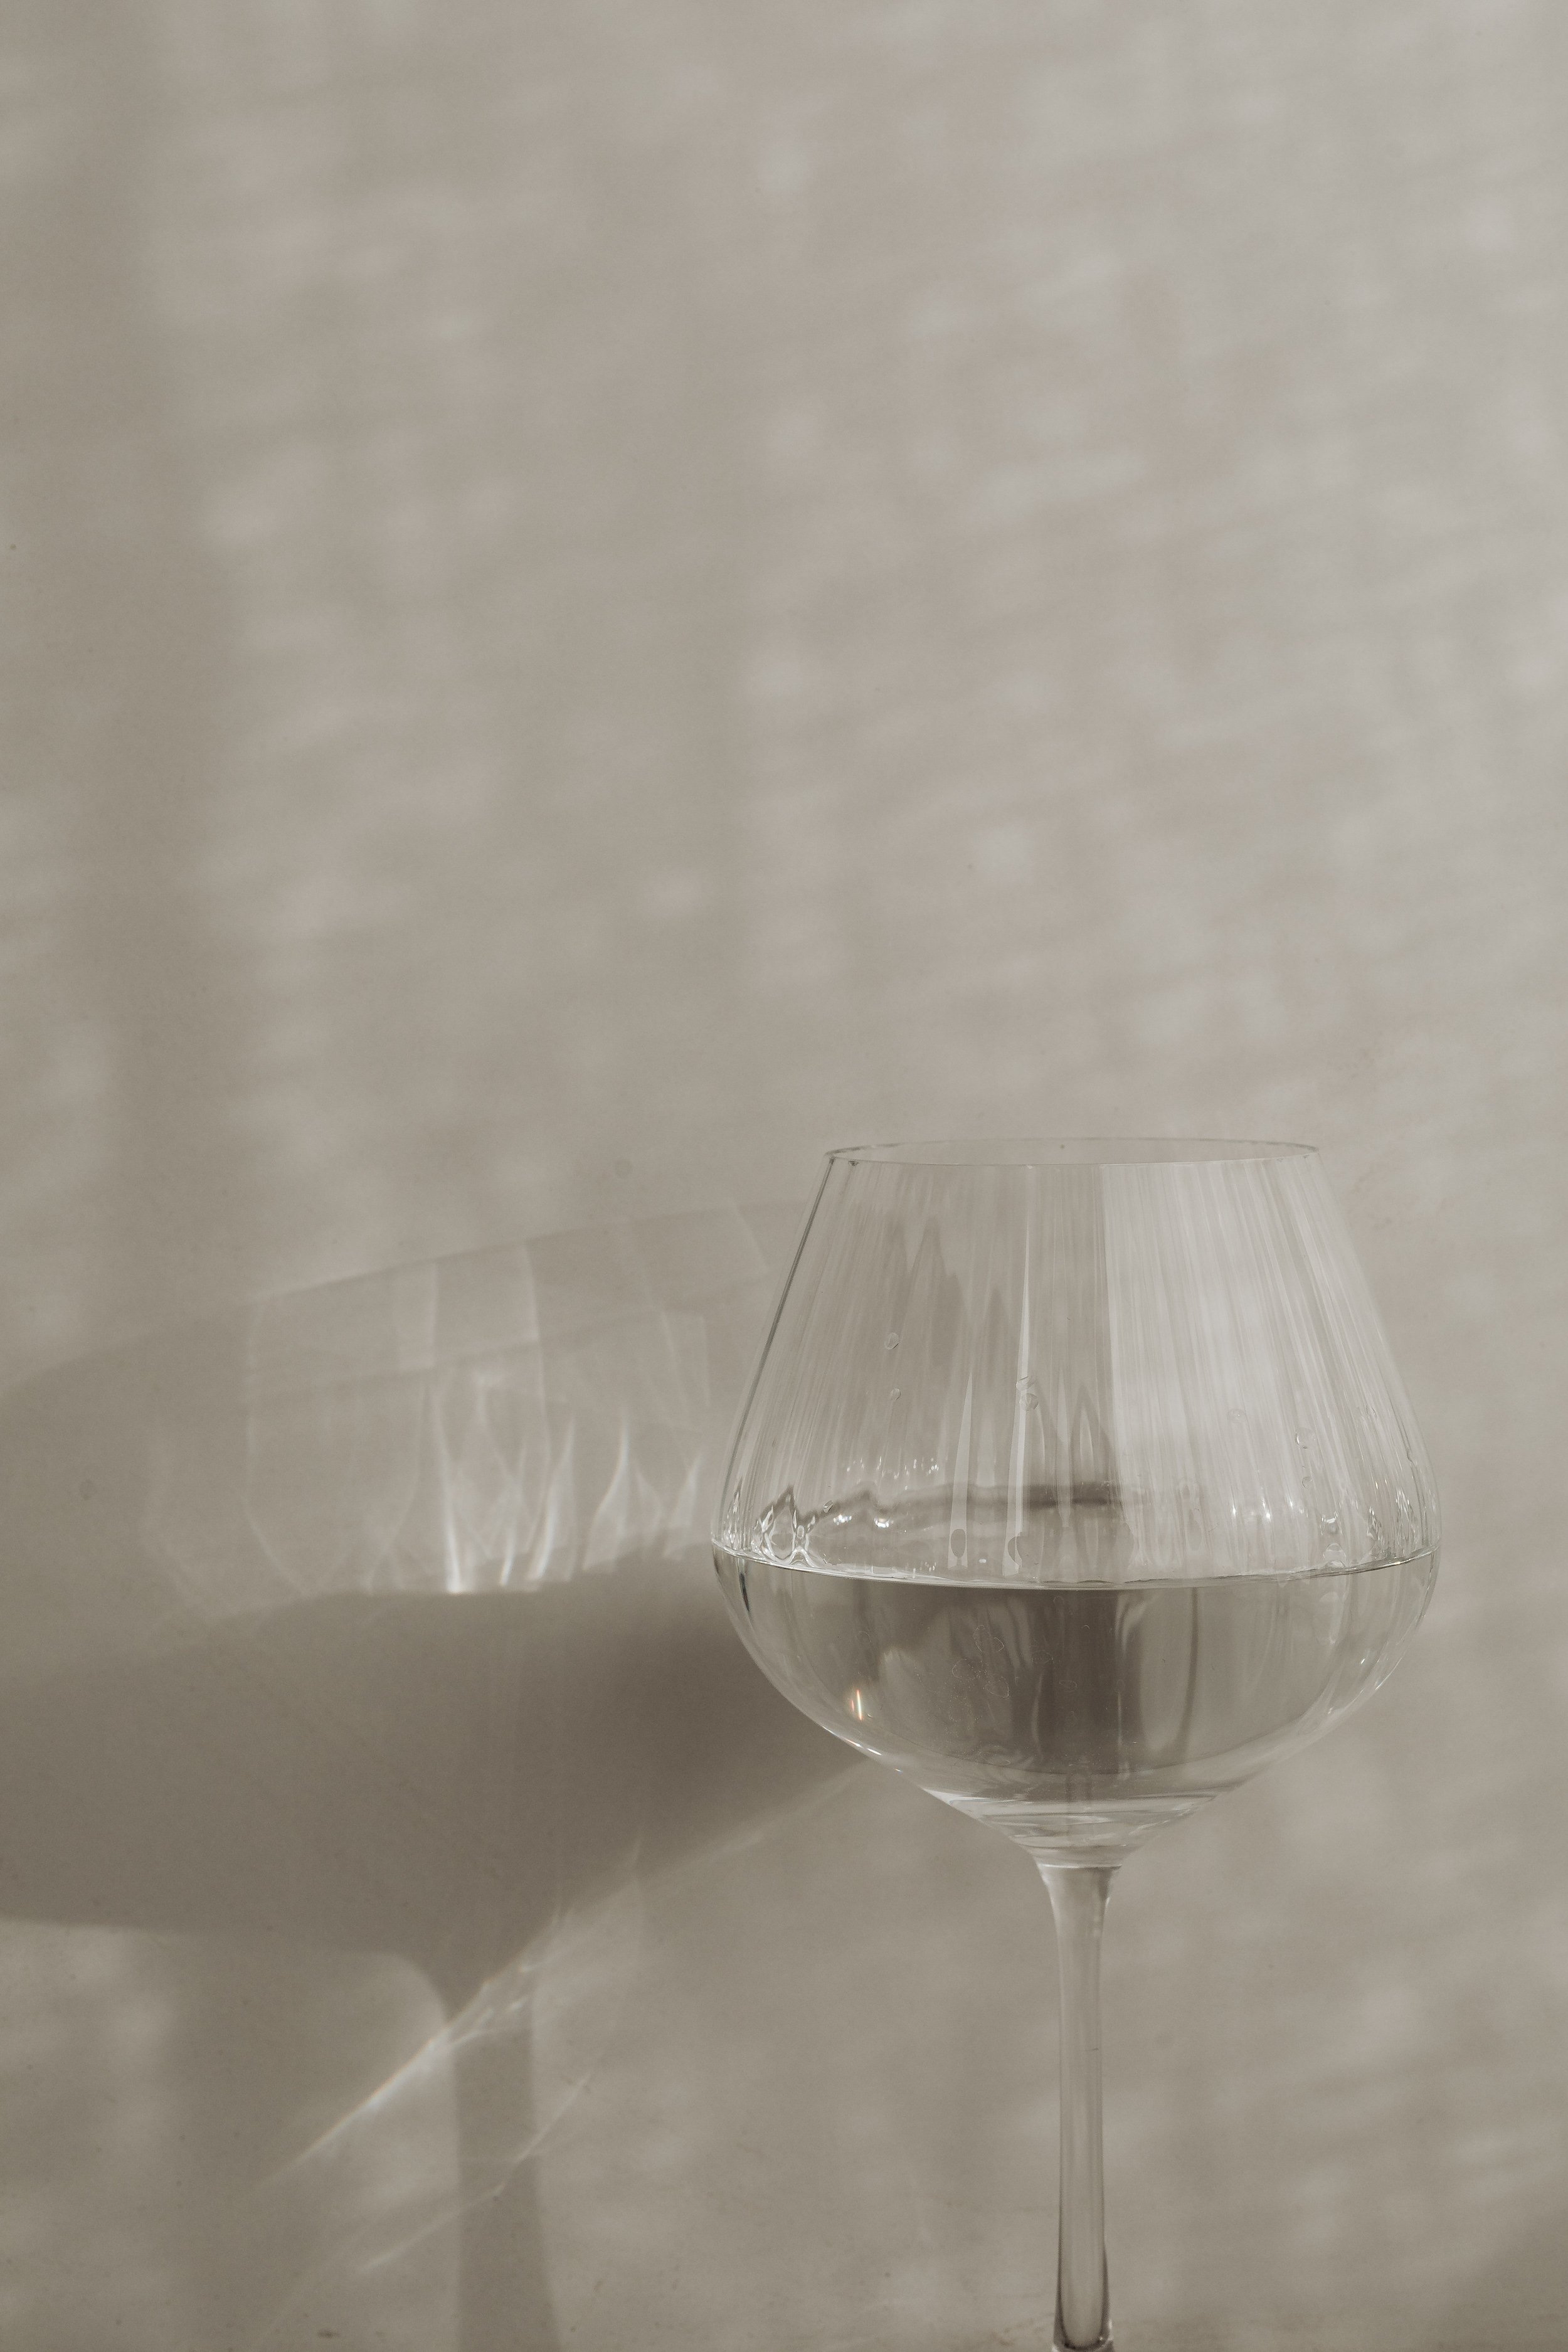 kaboompics_water-in-wine-glass-shadows-backgrounds-28801.jpg